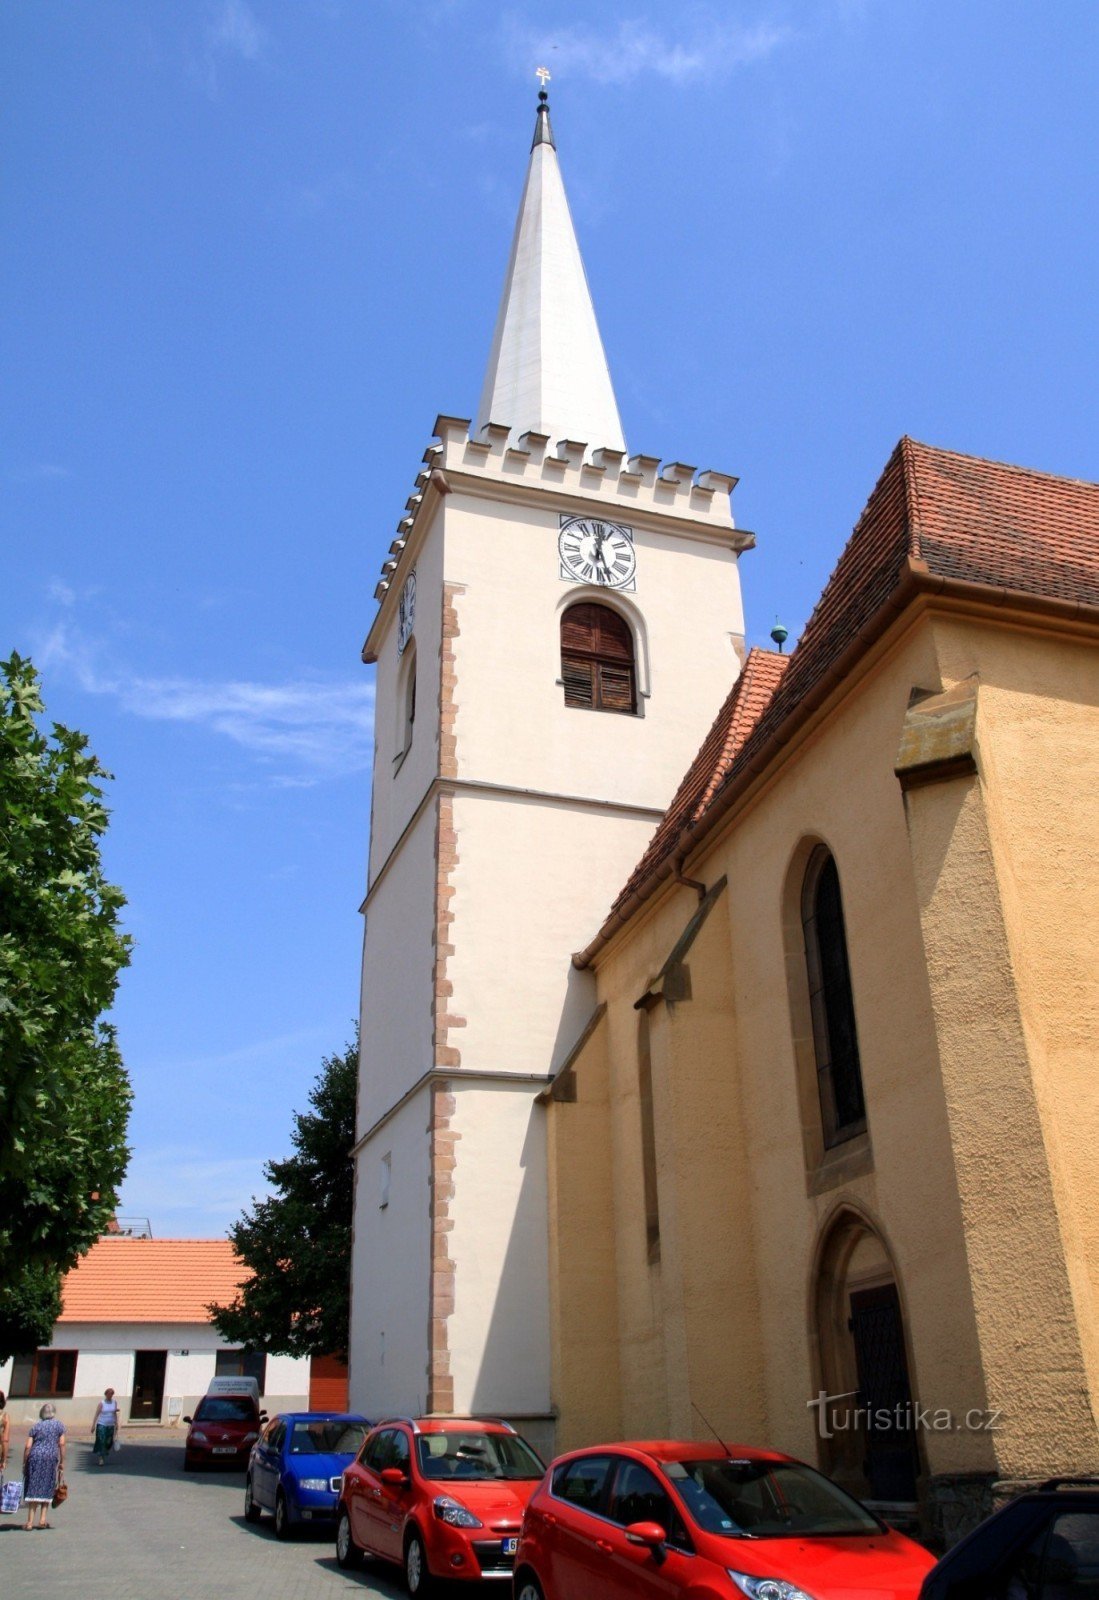 The tower of the church of St. Lawrence